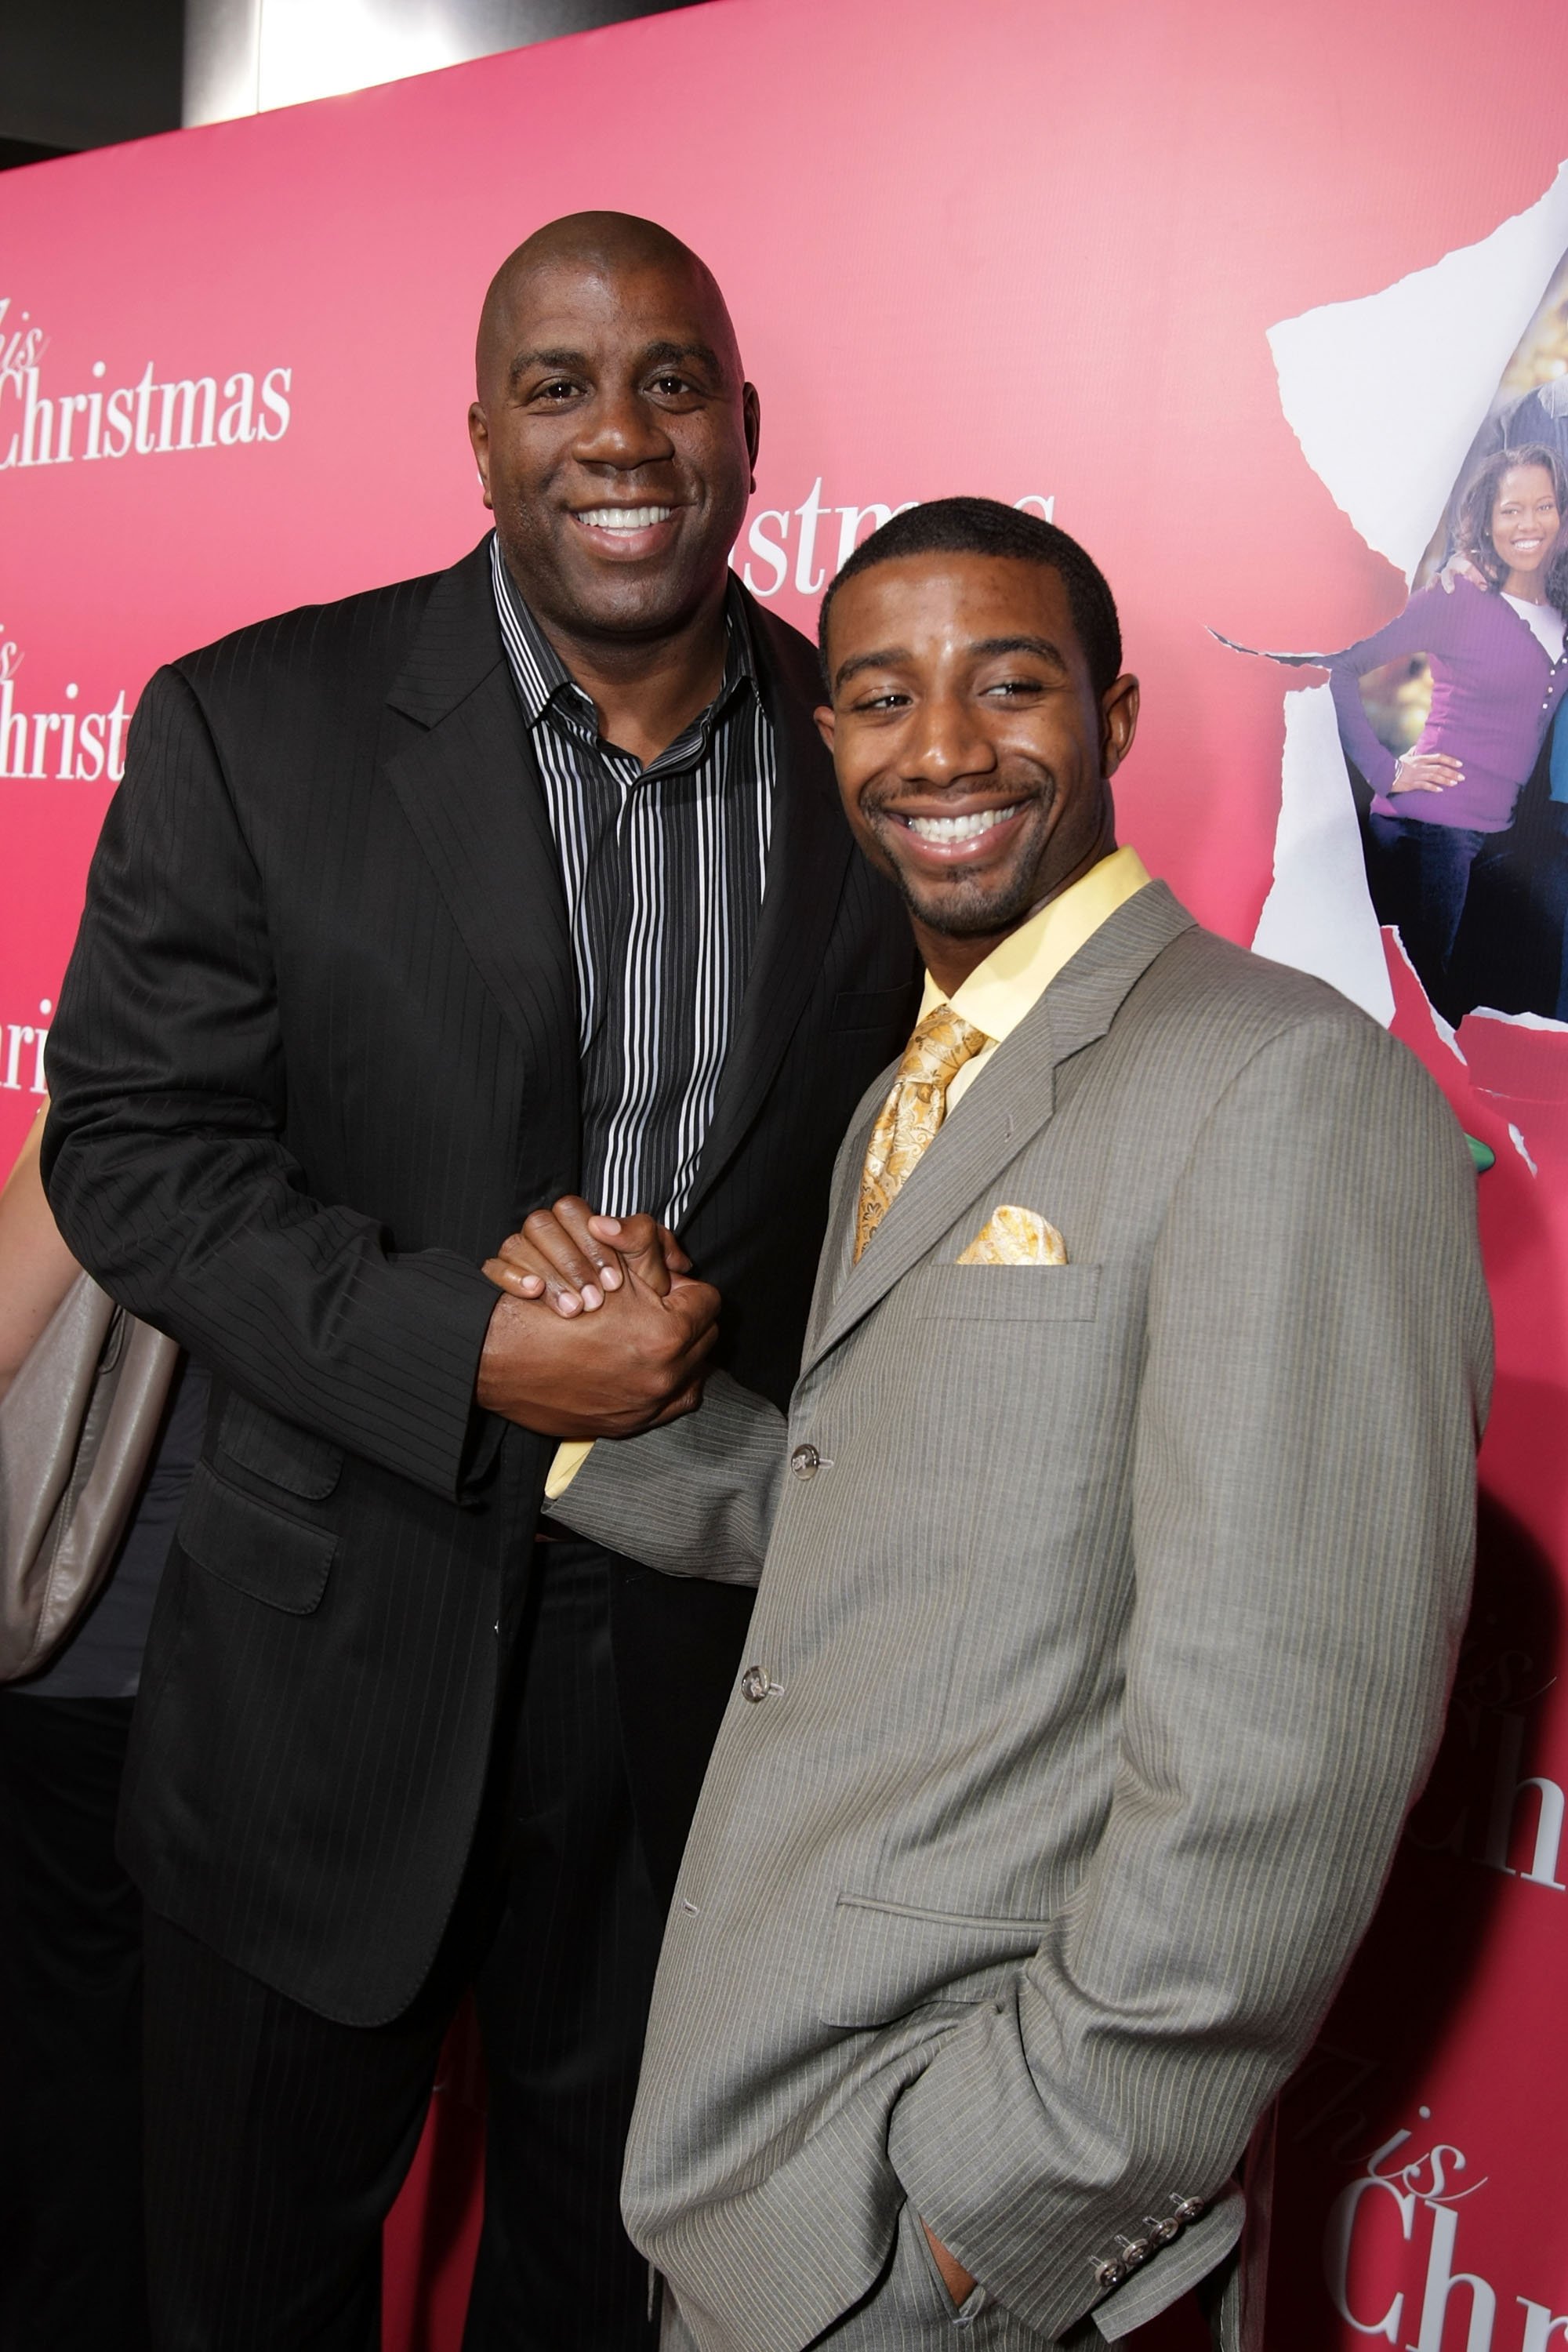 Earvin "Magic" Johnson and son Andre Johnson at the "This Christmas" premiere at the Cinerama Dome on November 12, 2007 | Photo: GettyImages